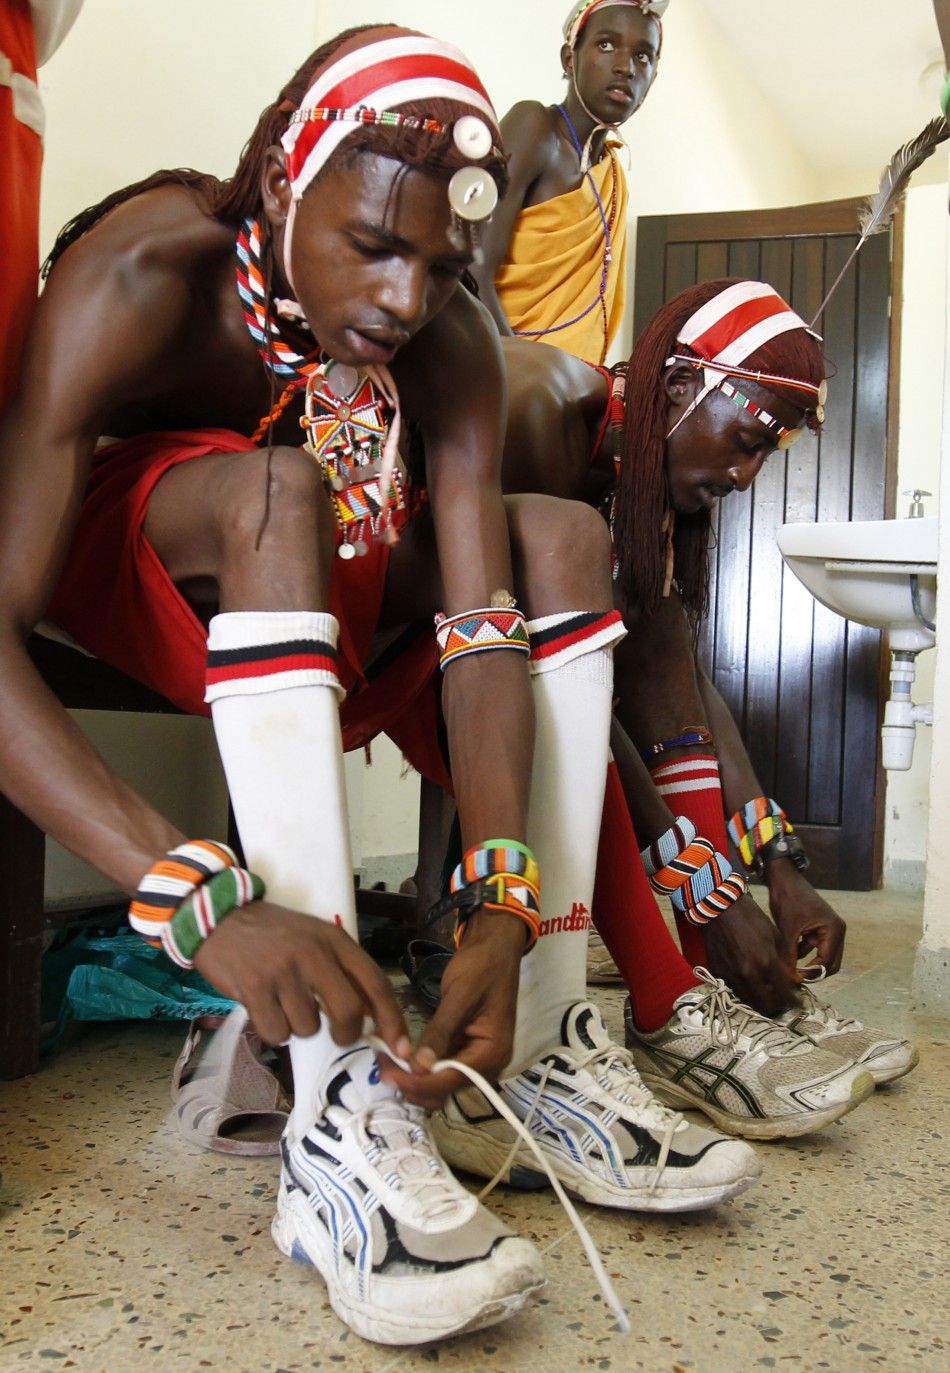 Members of the Maasai Cricket Warriors prepare for their friendly match against the Jafferys team in the Kenyan coastal city of Mombasa